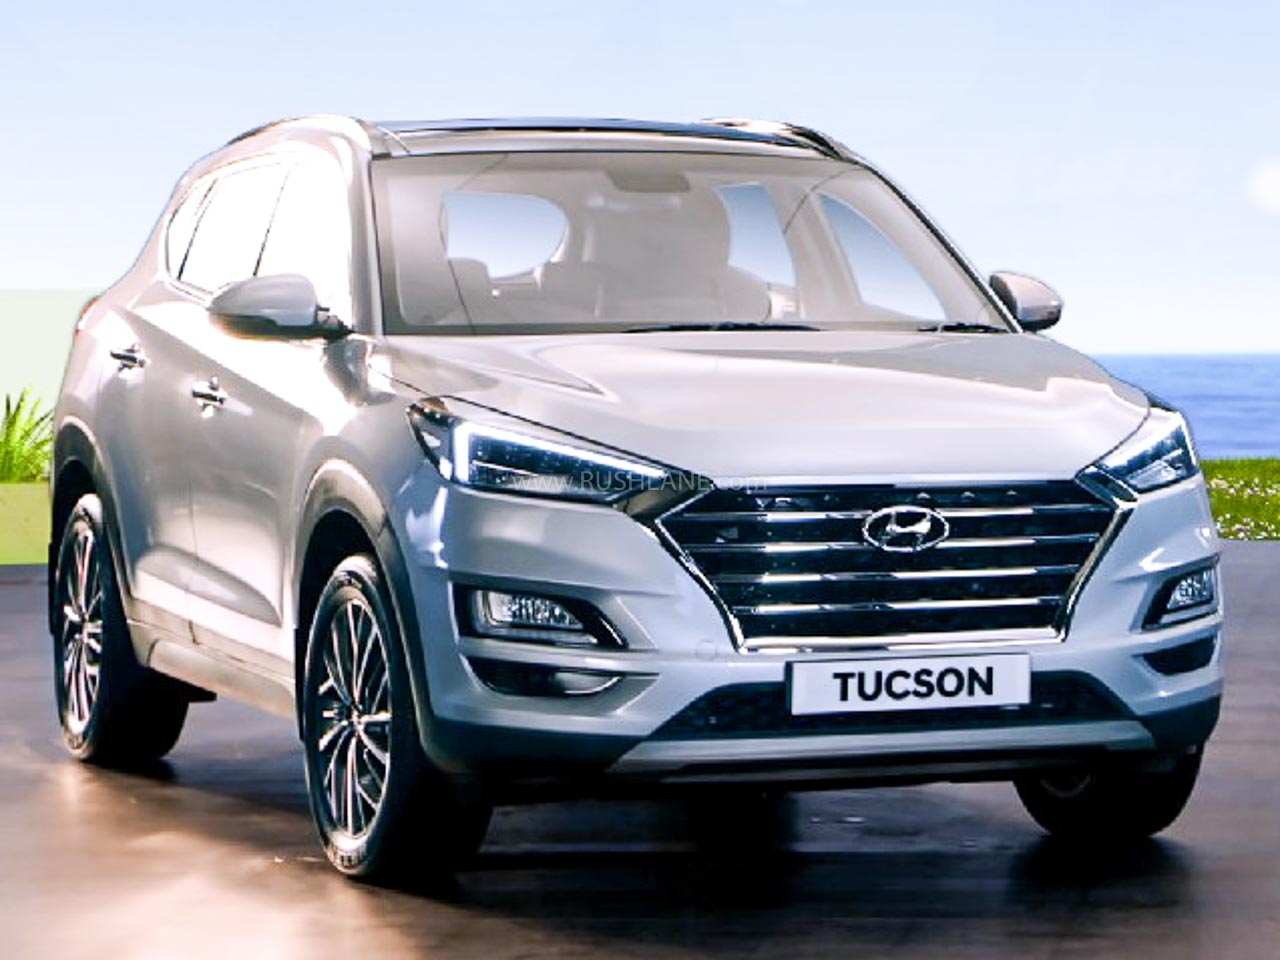 New Hyundai Tucson Facelift 2020 launch price Rs 22.3 lakh